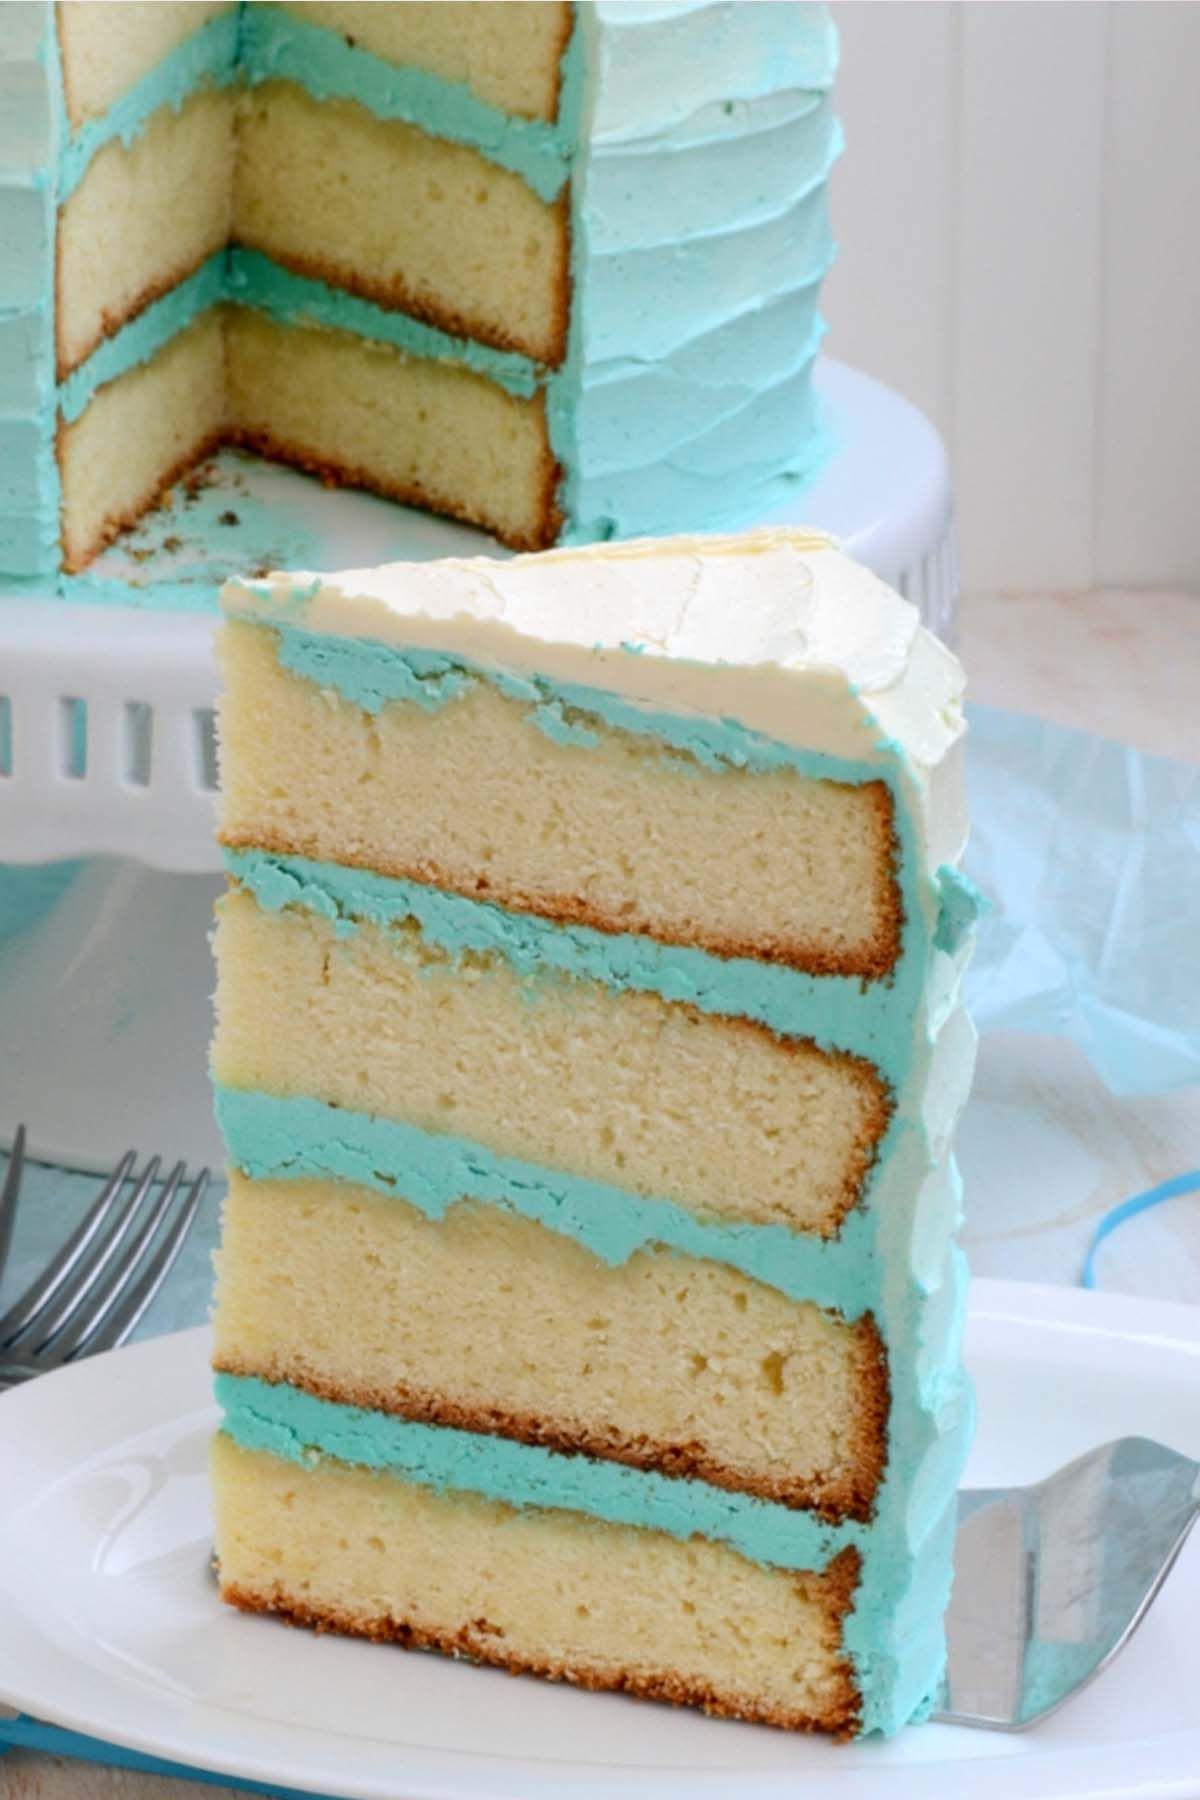 20 Cute Baby Shower Cakes For Girls And Boys Easy Recipes For Baby